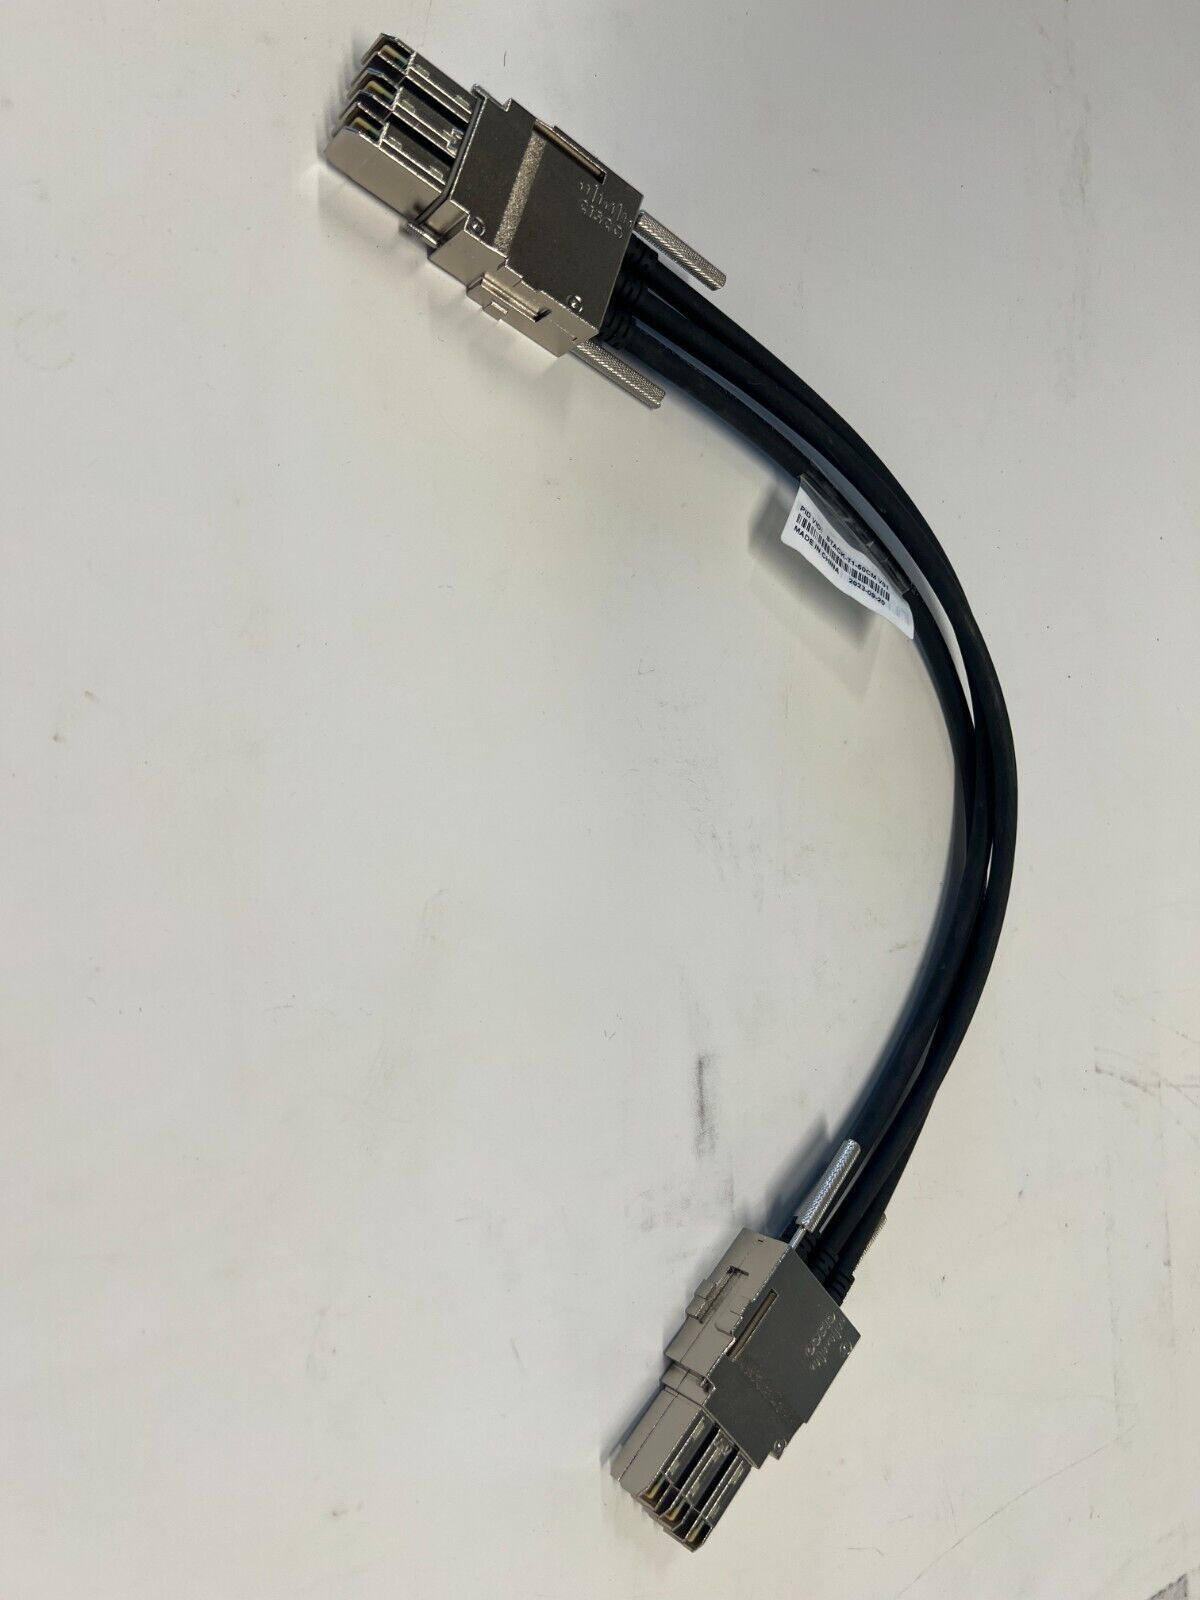 Cisco 50cm Stackwise Stacking Cable STACK-T1-50CM 800-40403-01